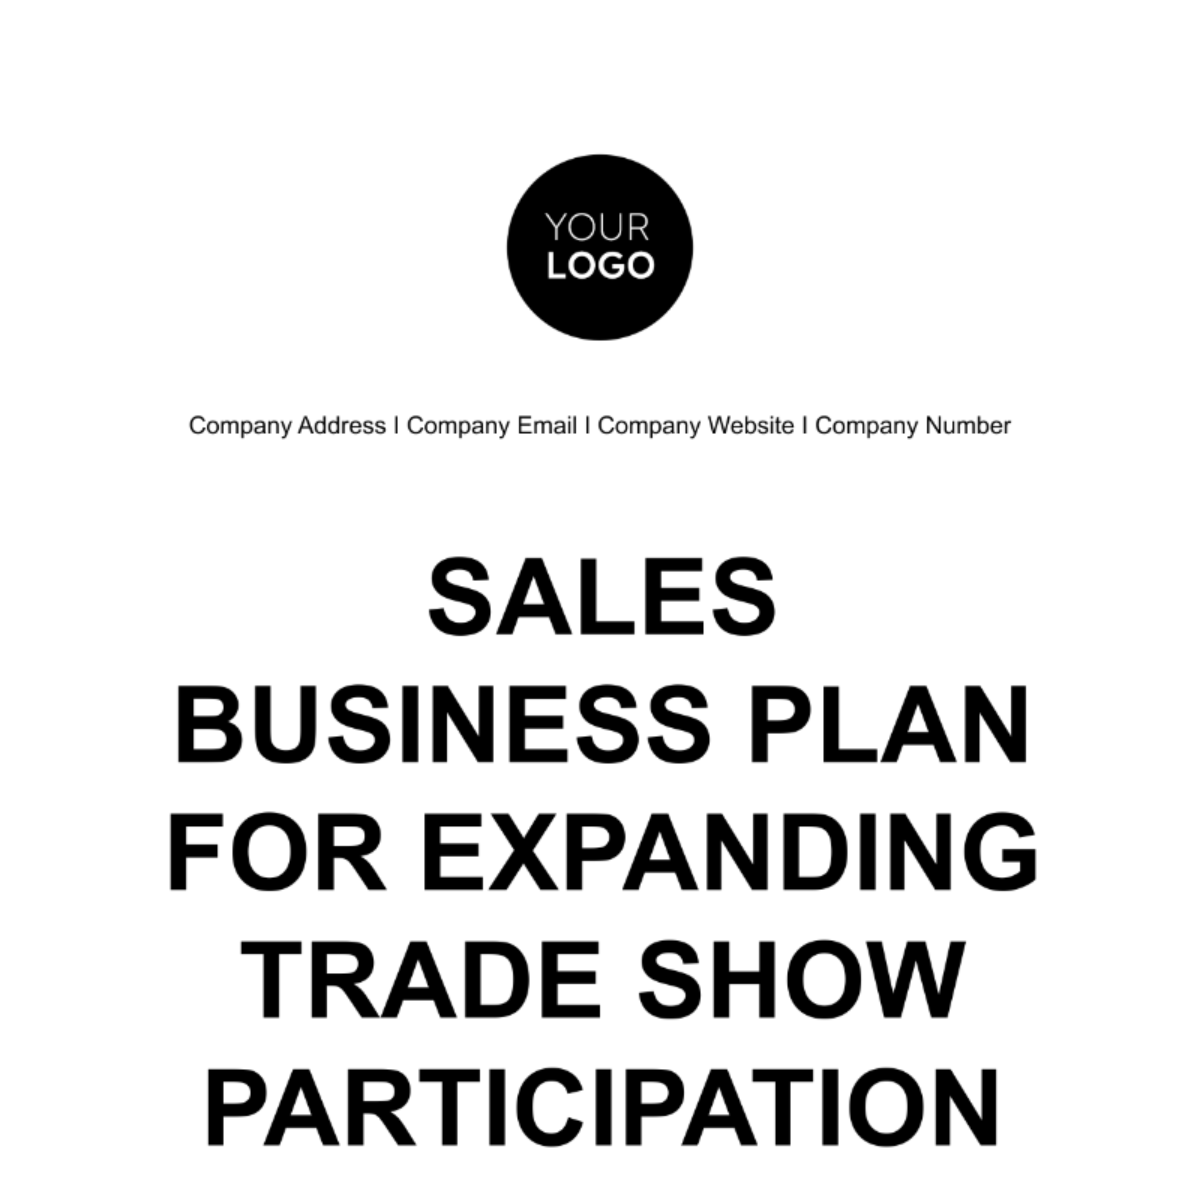 Sales Business Plan for Expanding Trade Show Participation Template